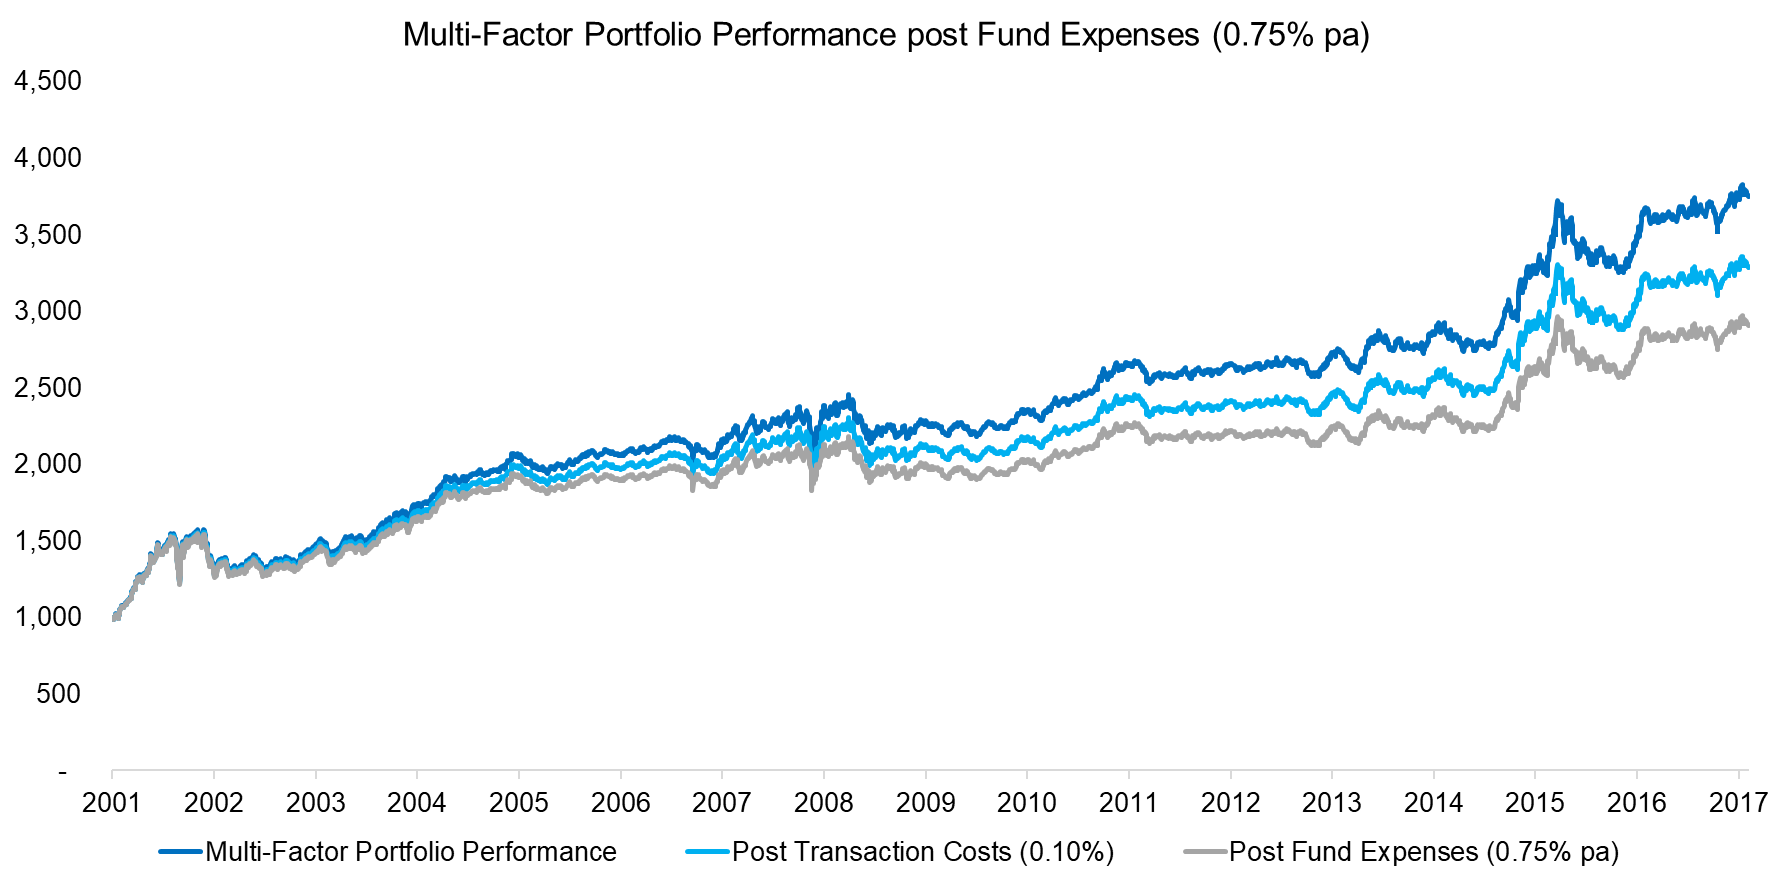 Factor Performance post Fund Expenses (0.75% pa)